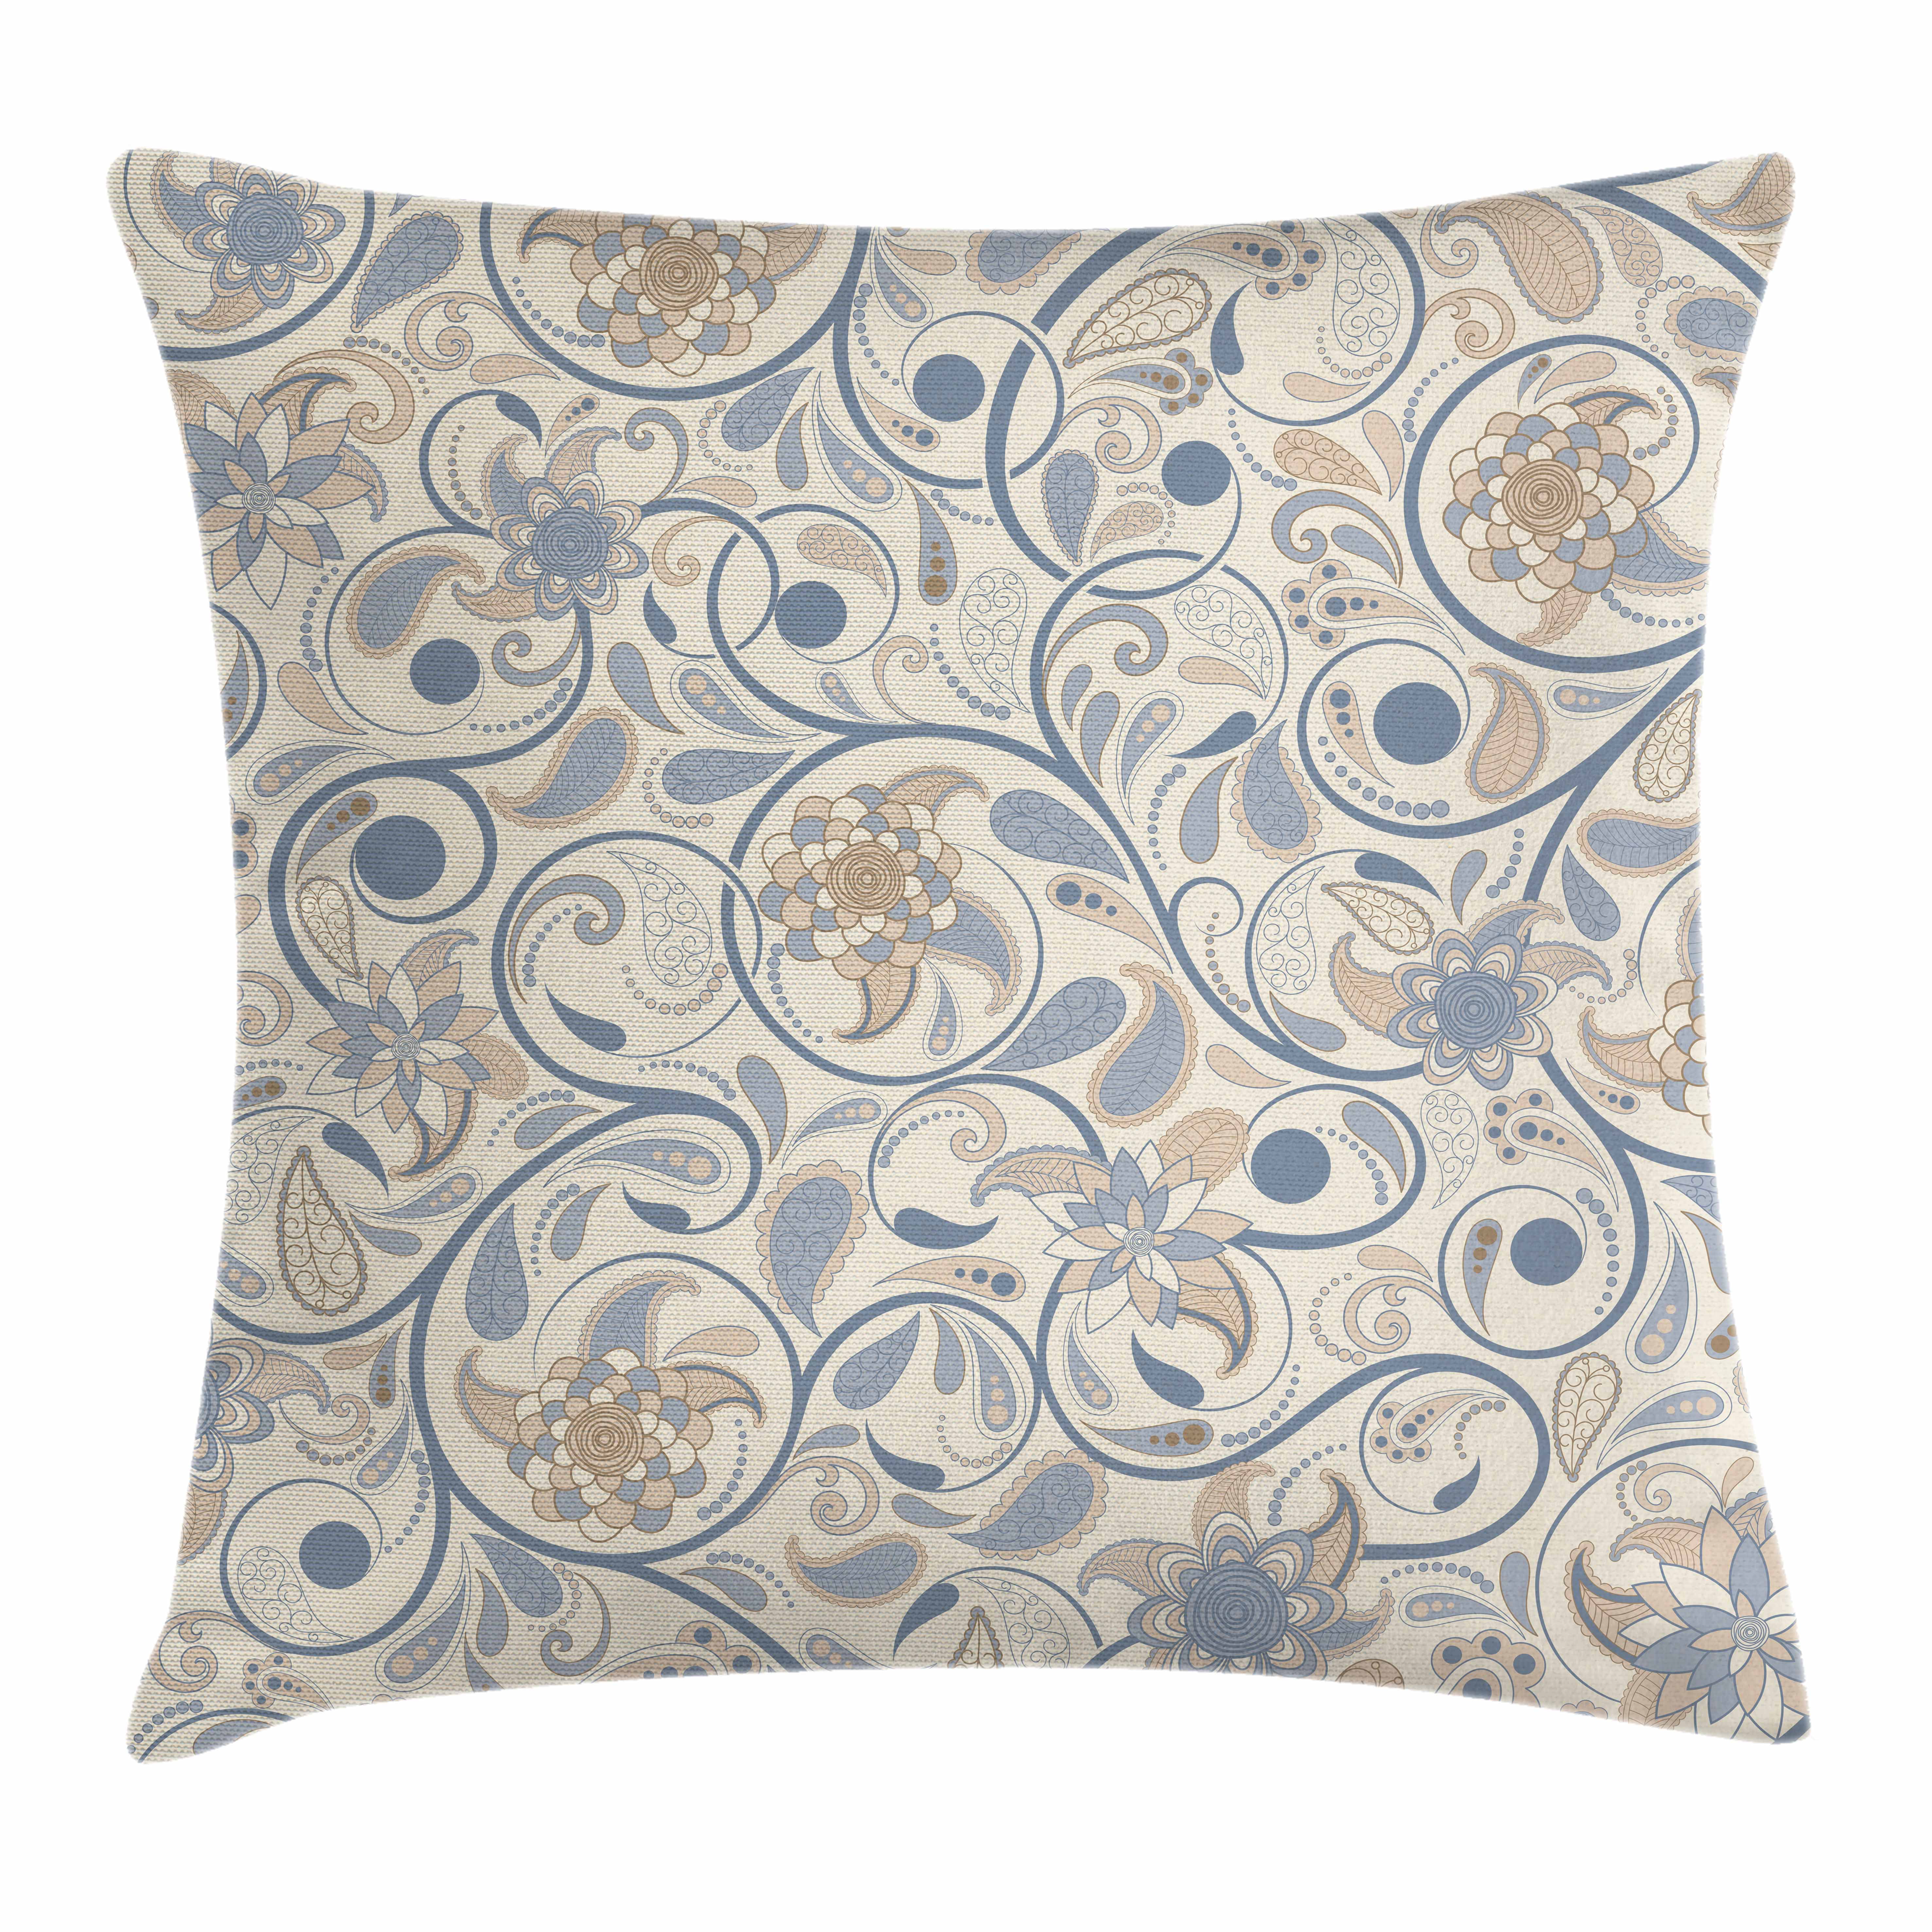 Vintage Throw Pillow Cushion Cover, Oriental Scroll with Swirling Leaves with Eastern Design